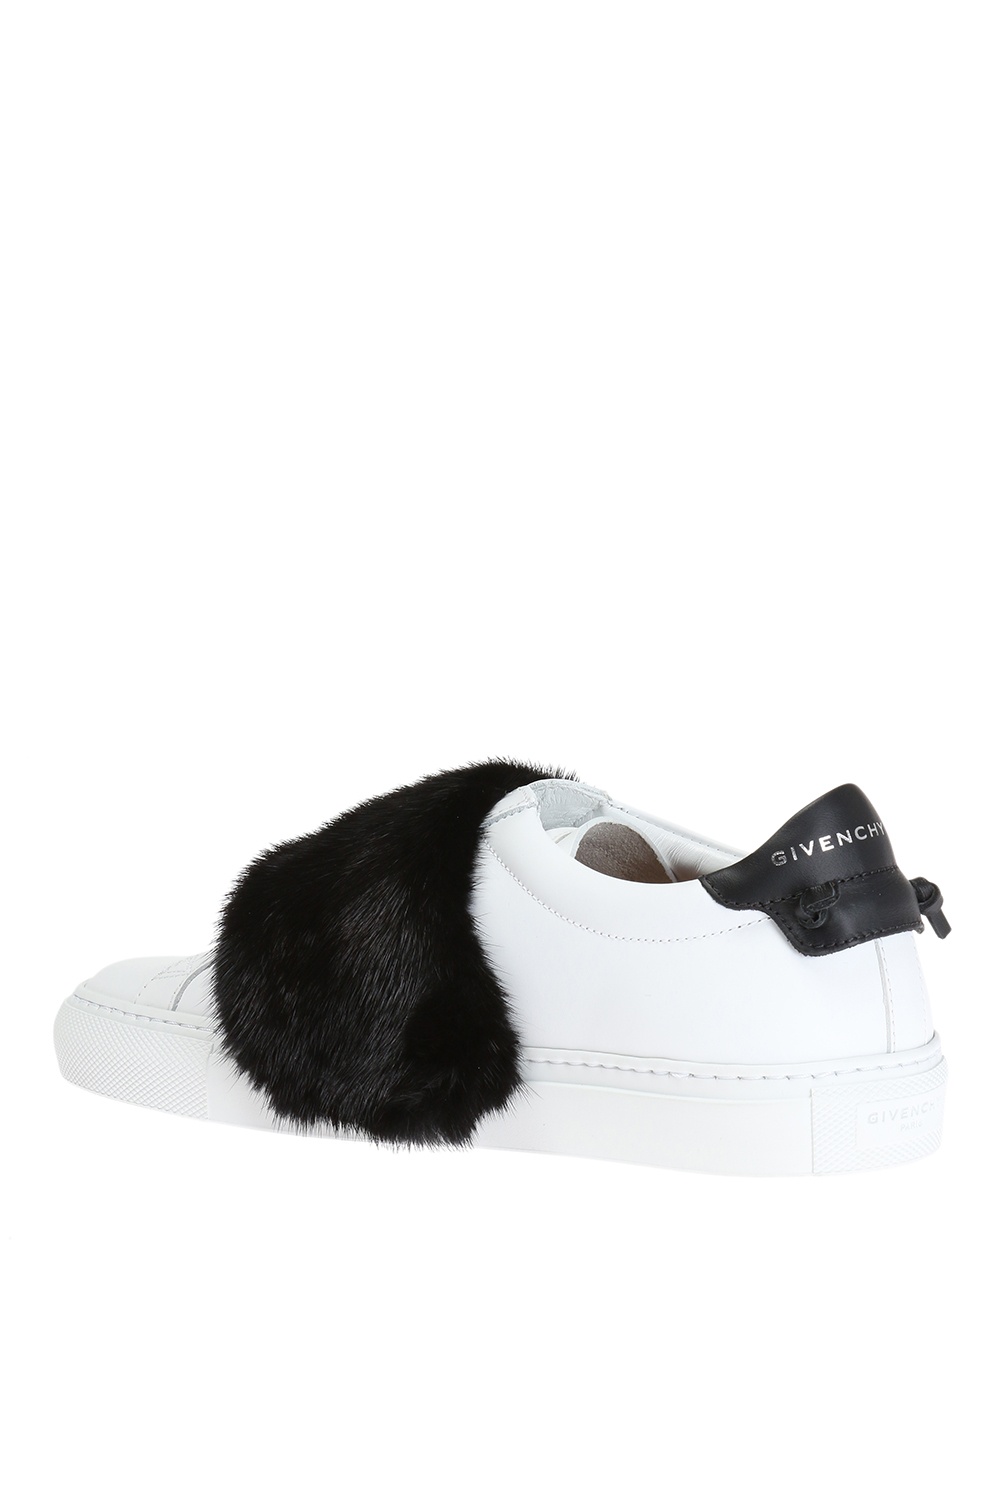 Mink fur sneakers Givenchy - Vitkac US